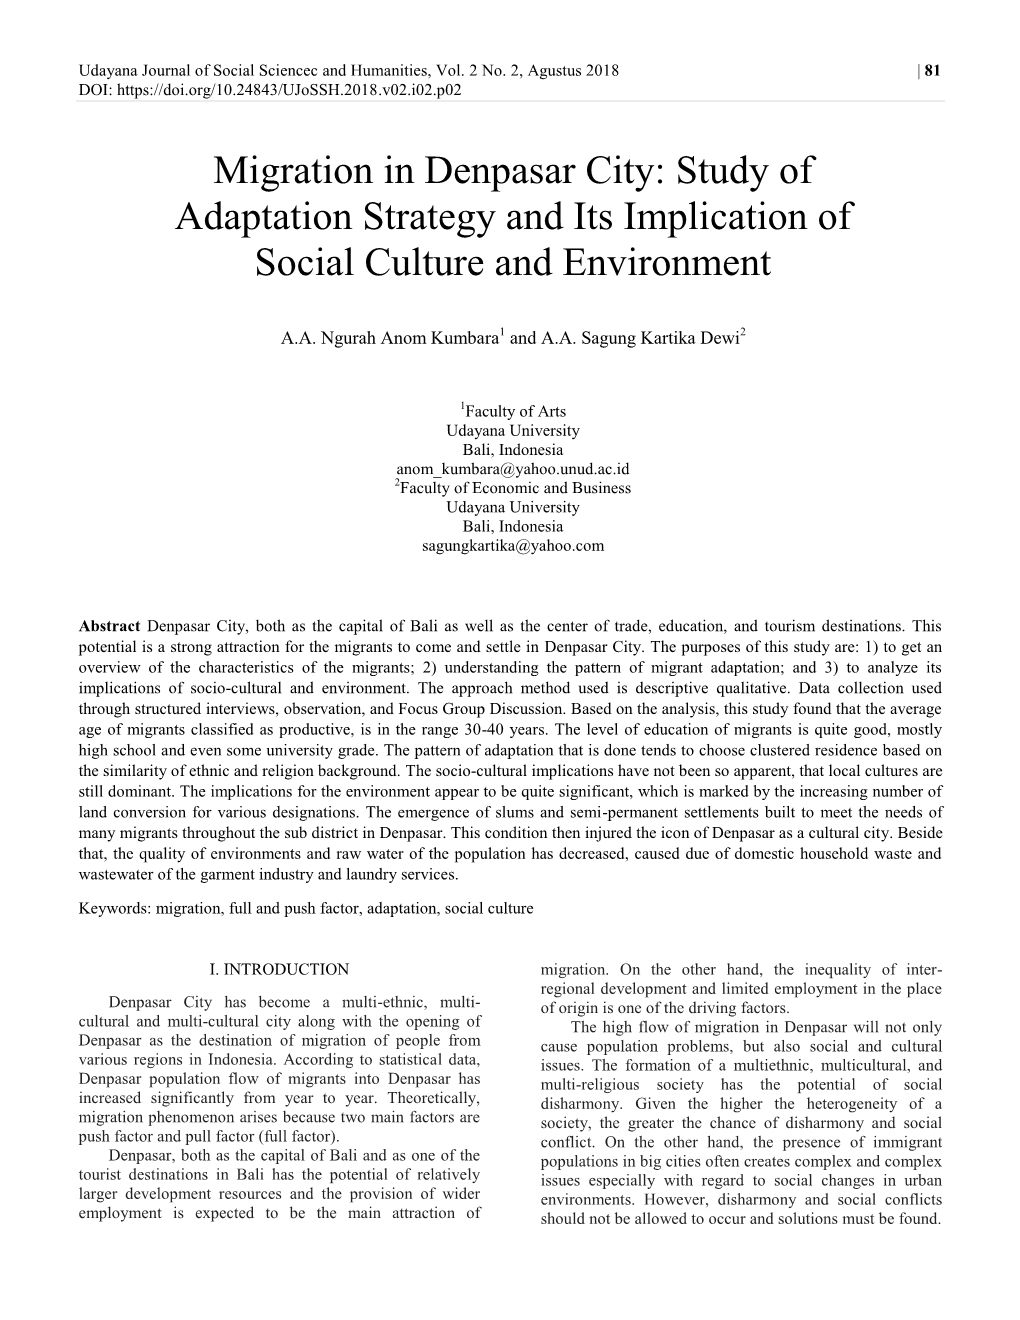 Migration in Denpasar City: Study of Adaptation Strategy and Its Implication of Social Culture and Environment